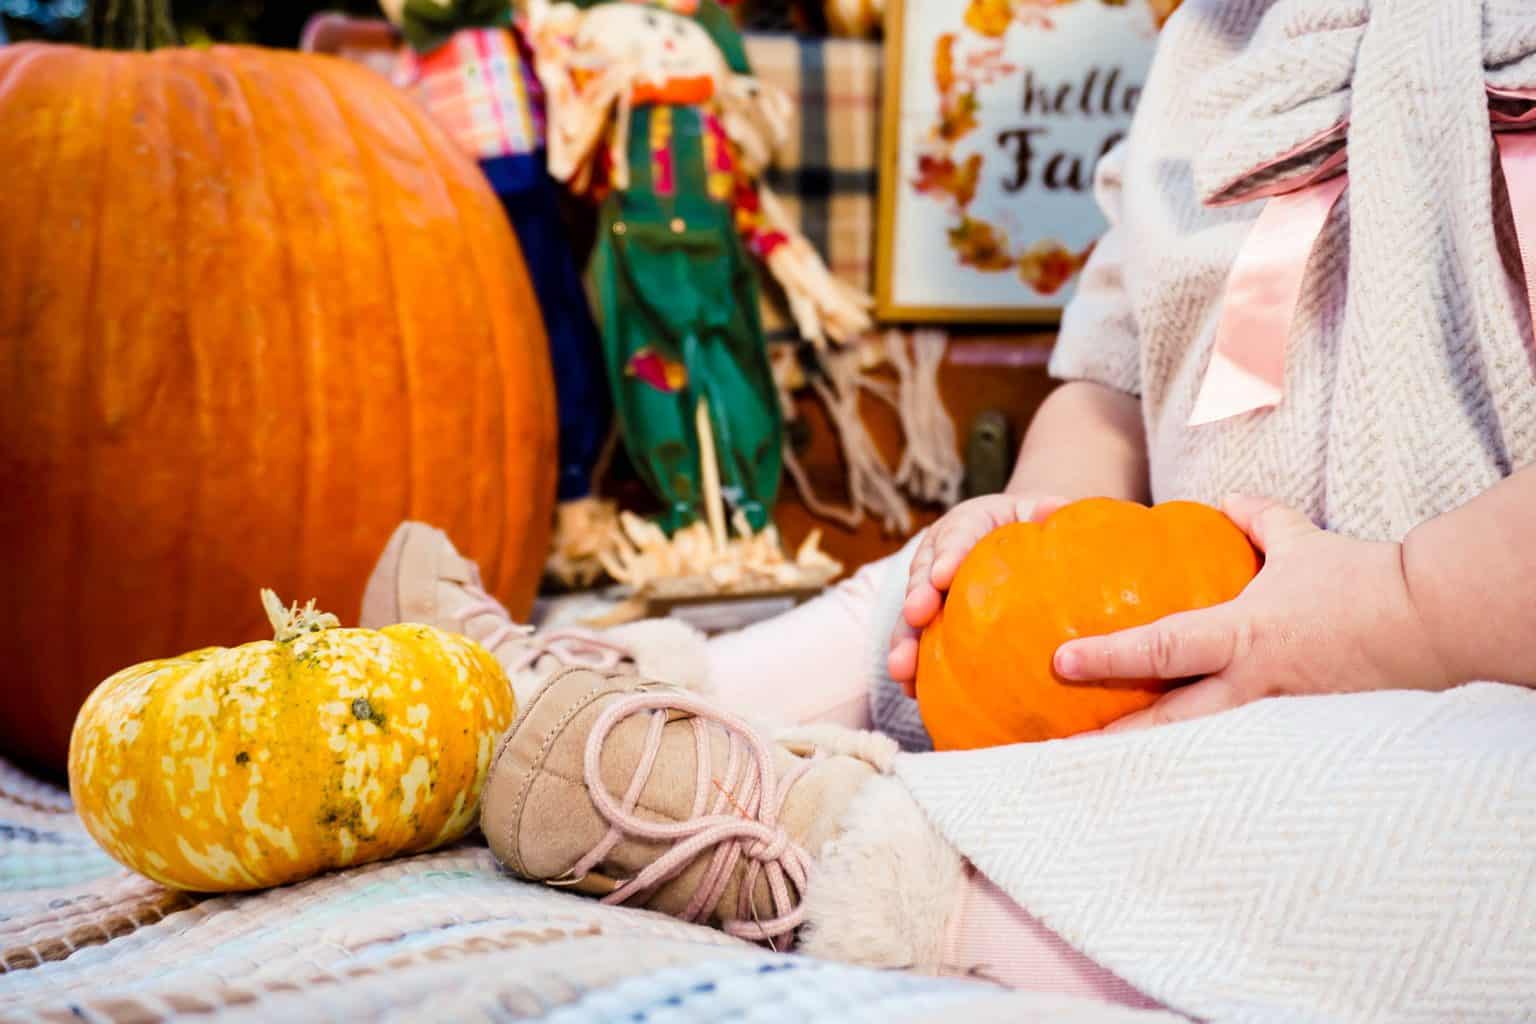 All size of pumpkins used as an ornament held by a baby